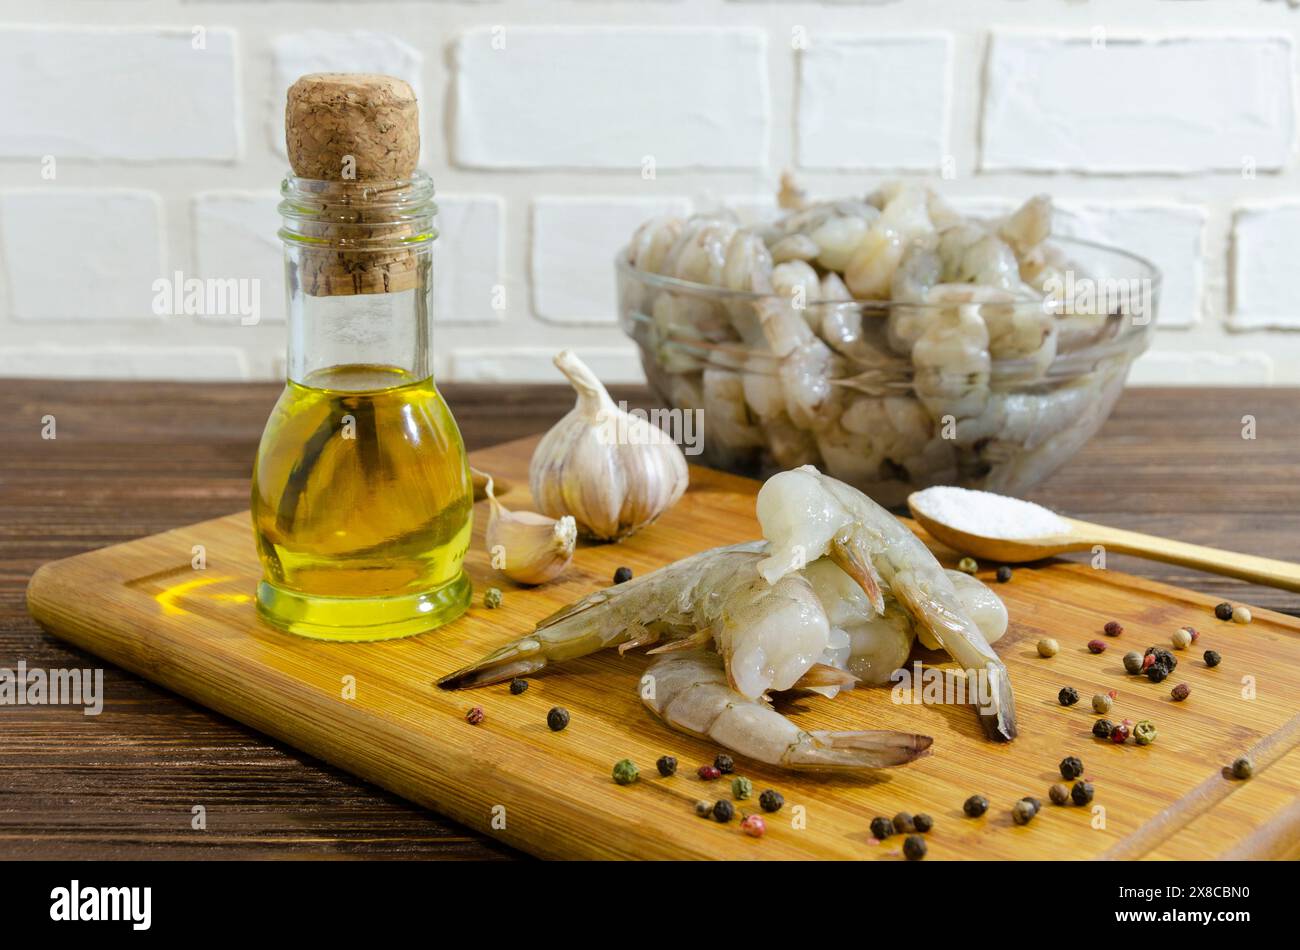 Raw shrimp on a cutting board with olive oil, spices and garlic. Stock Photo